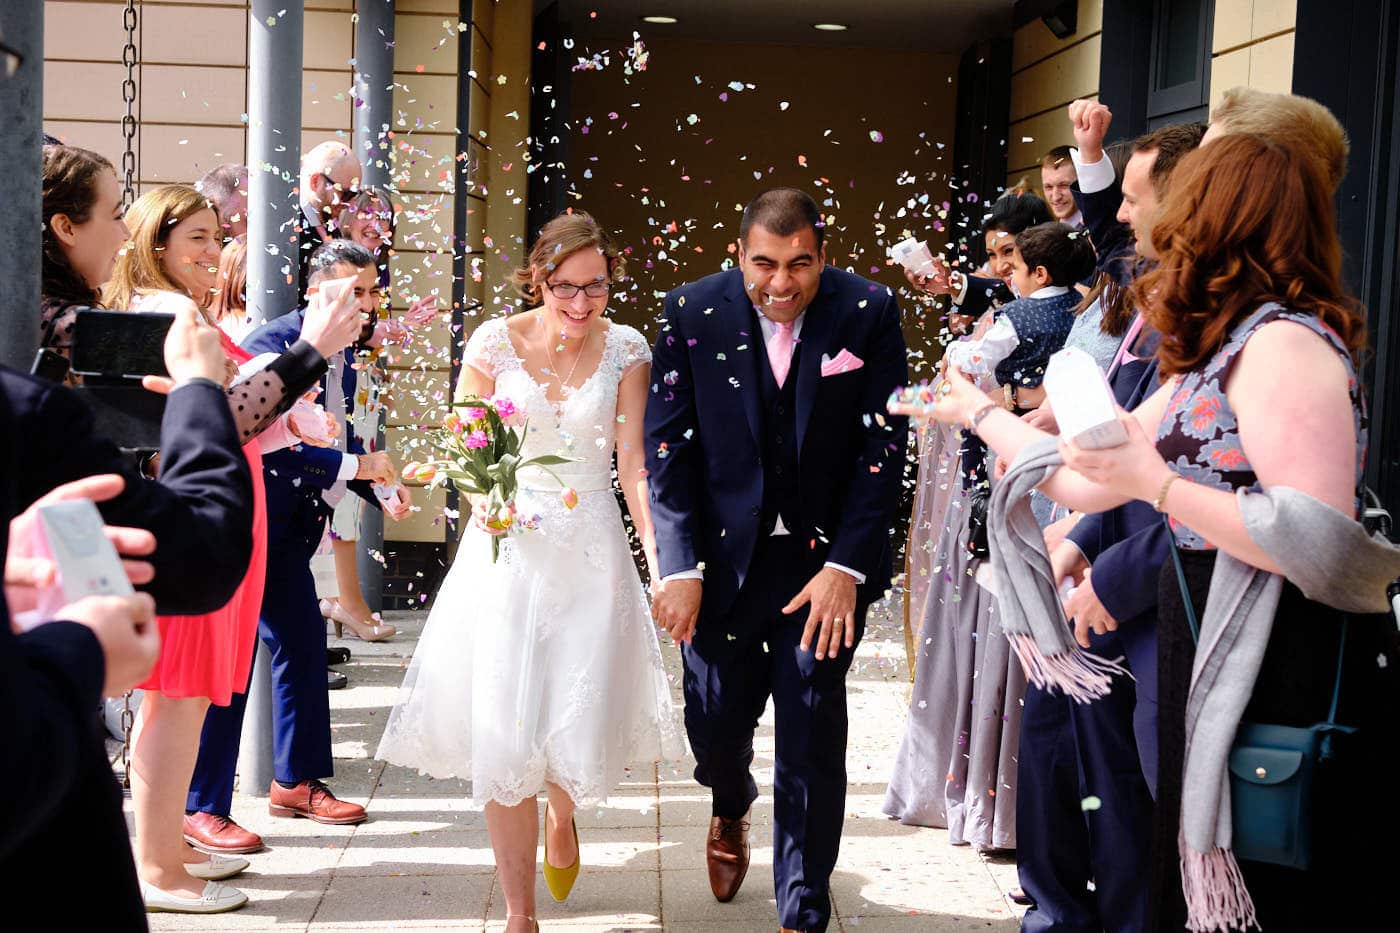 Bride and groom having confetti thrown on their